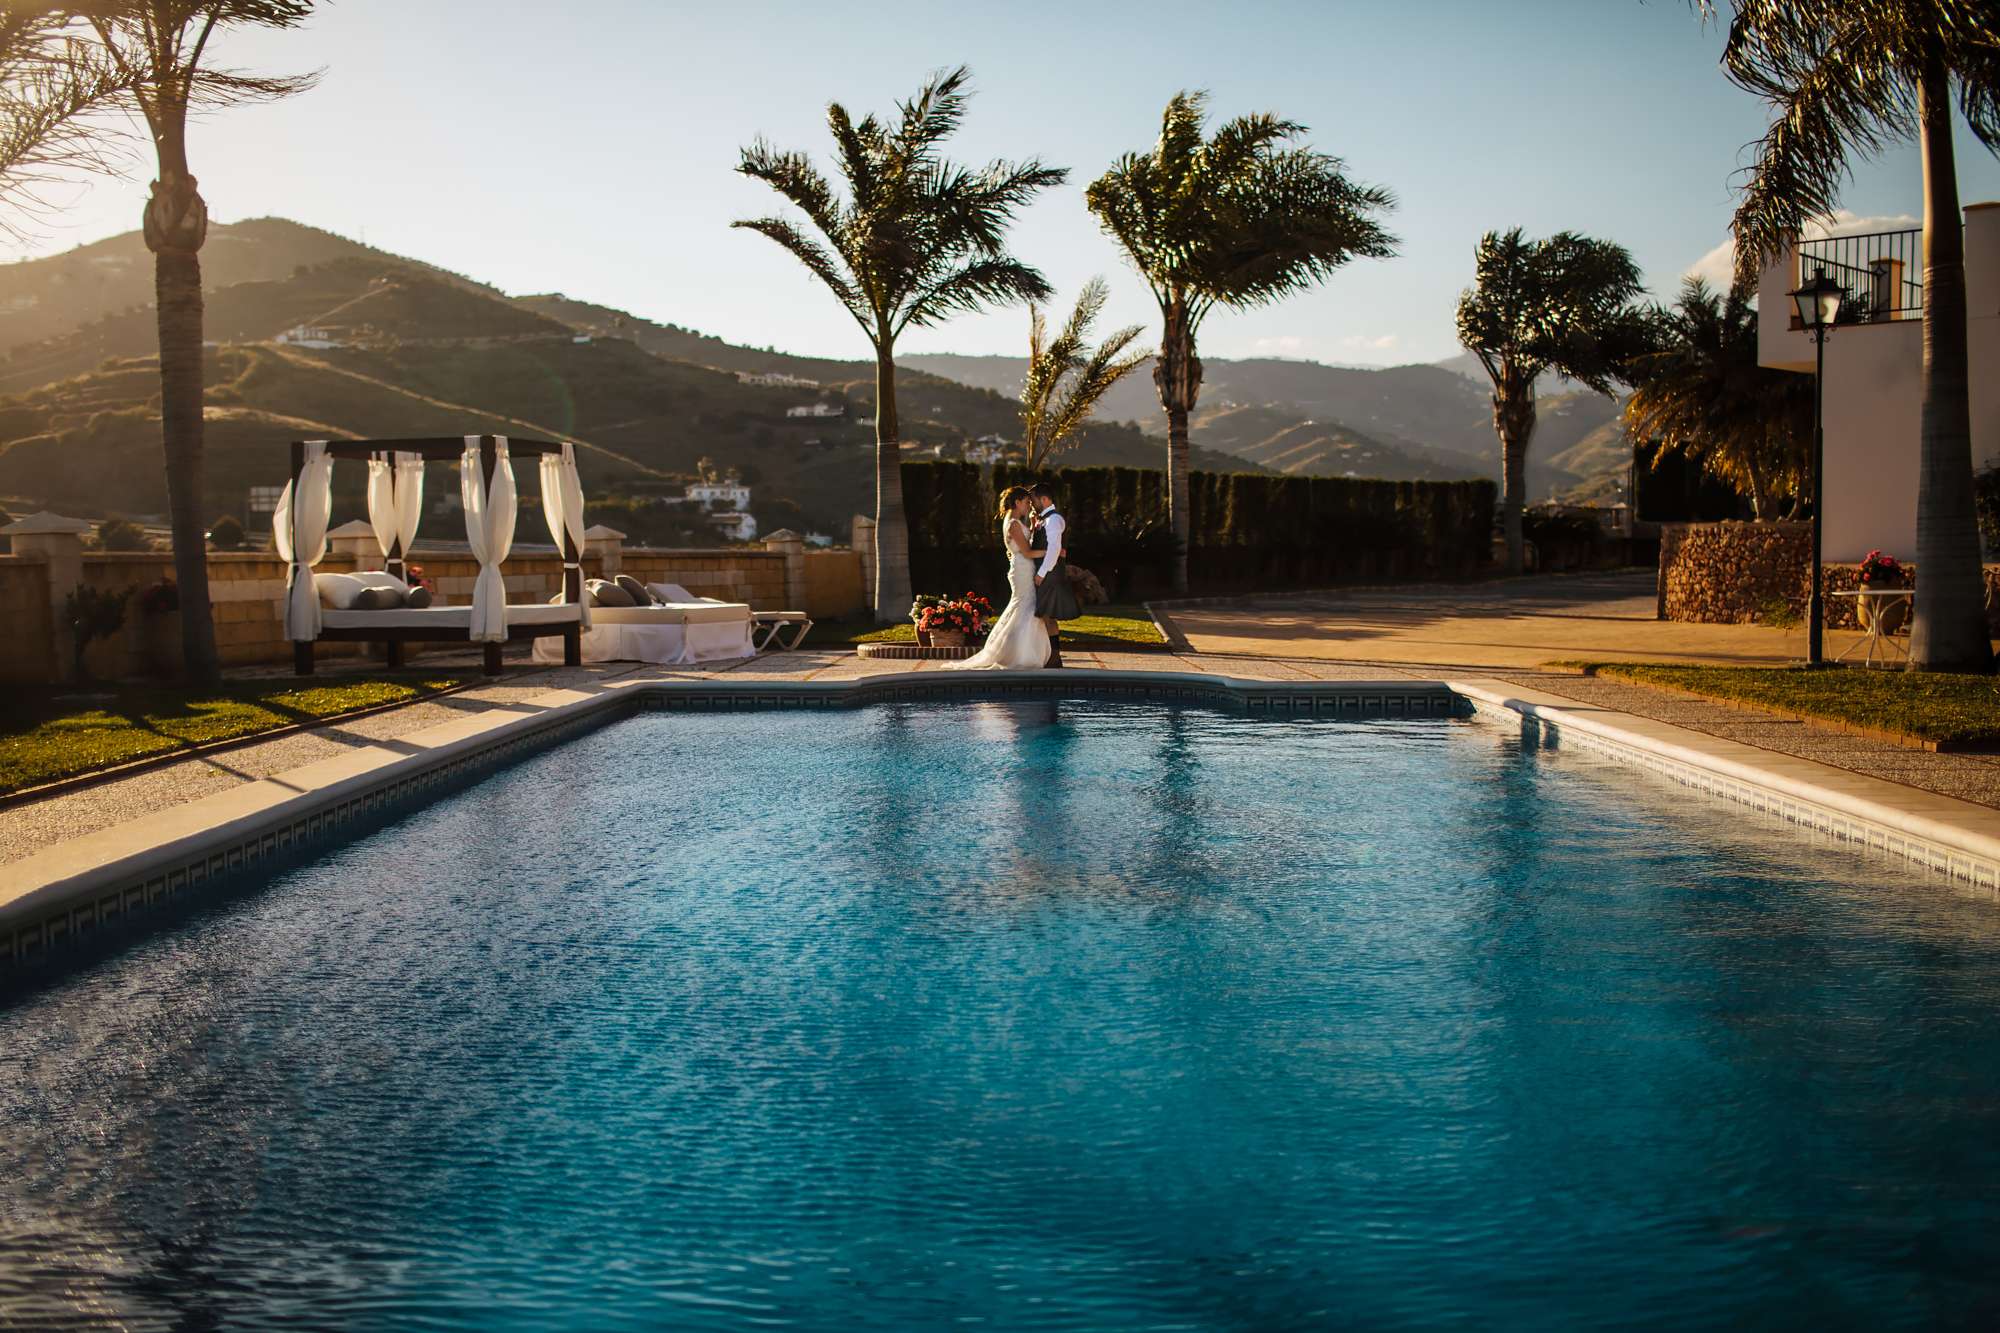 Bride and groom by the swimming pool at their wedding